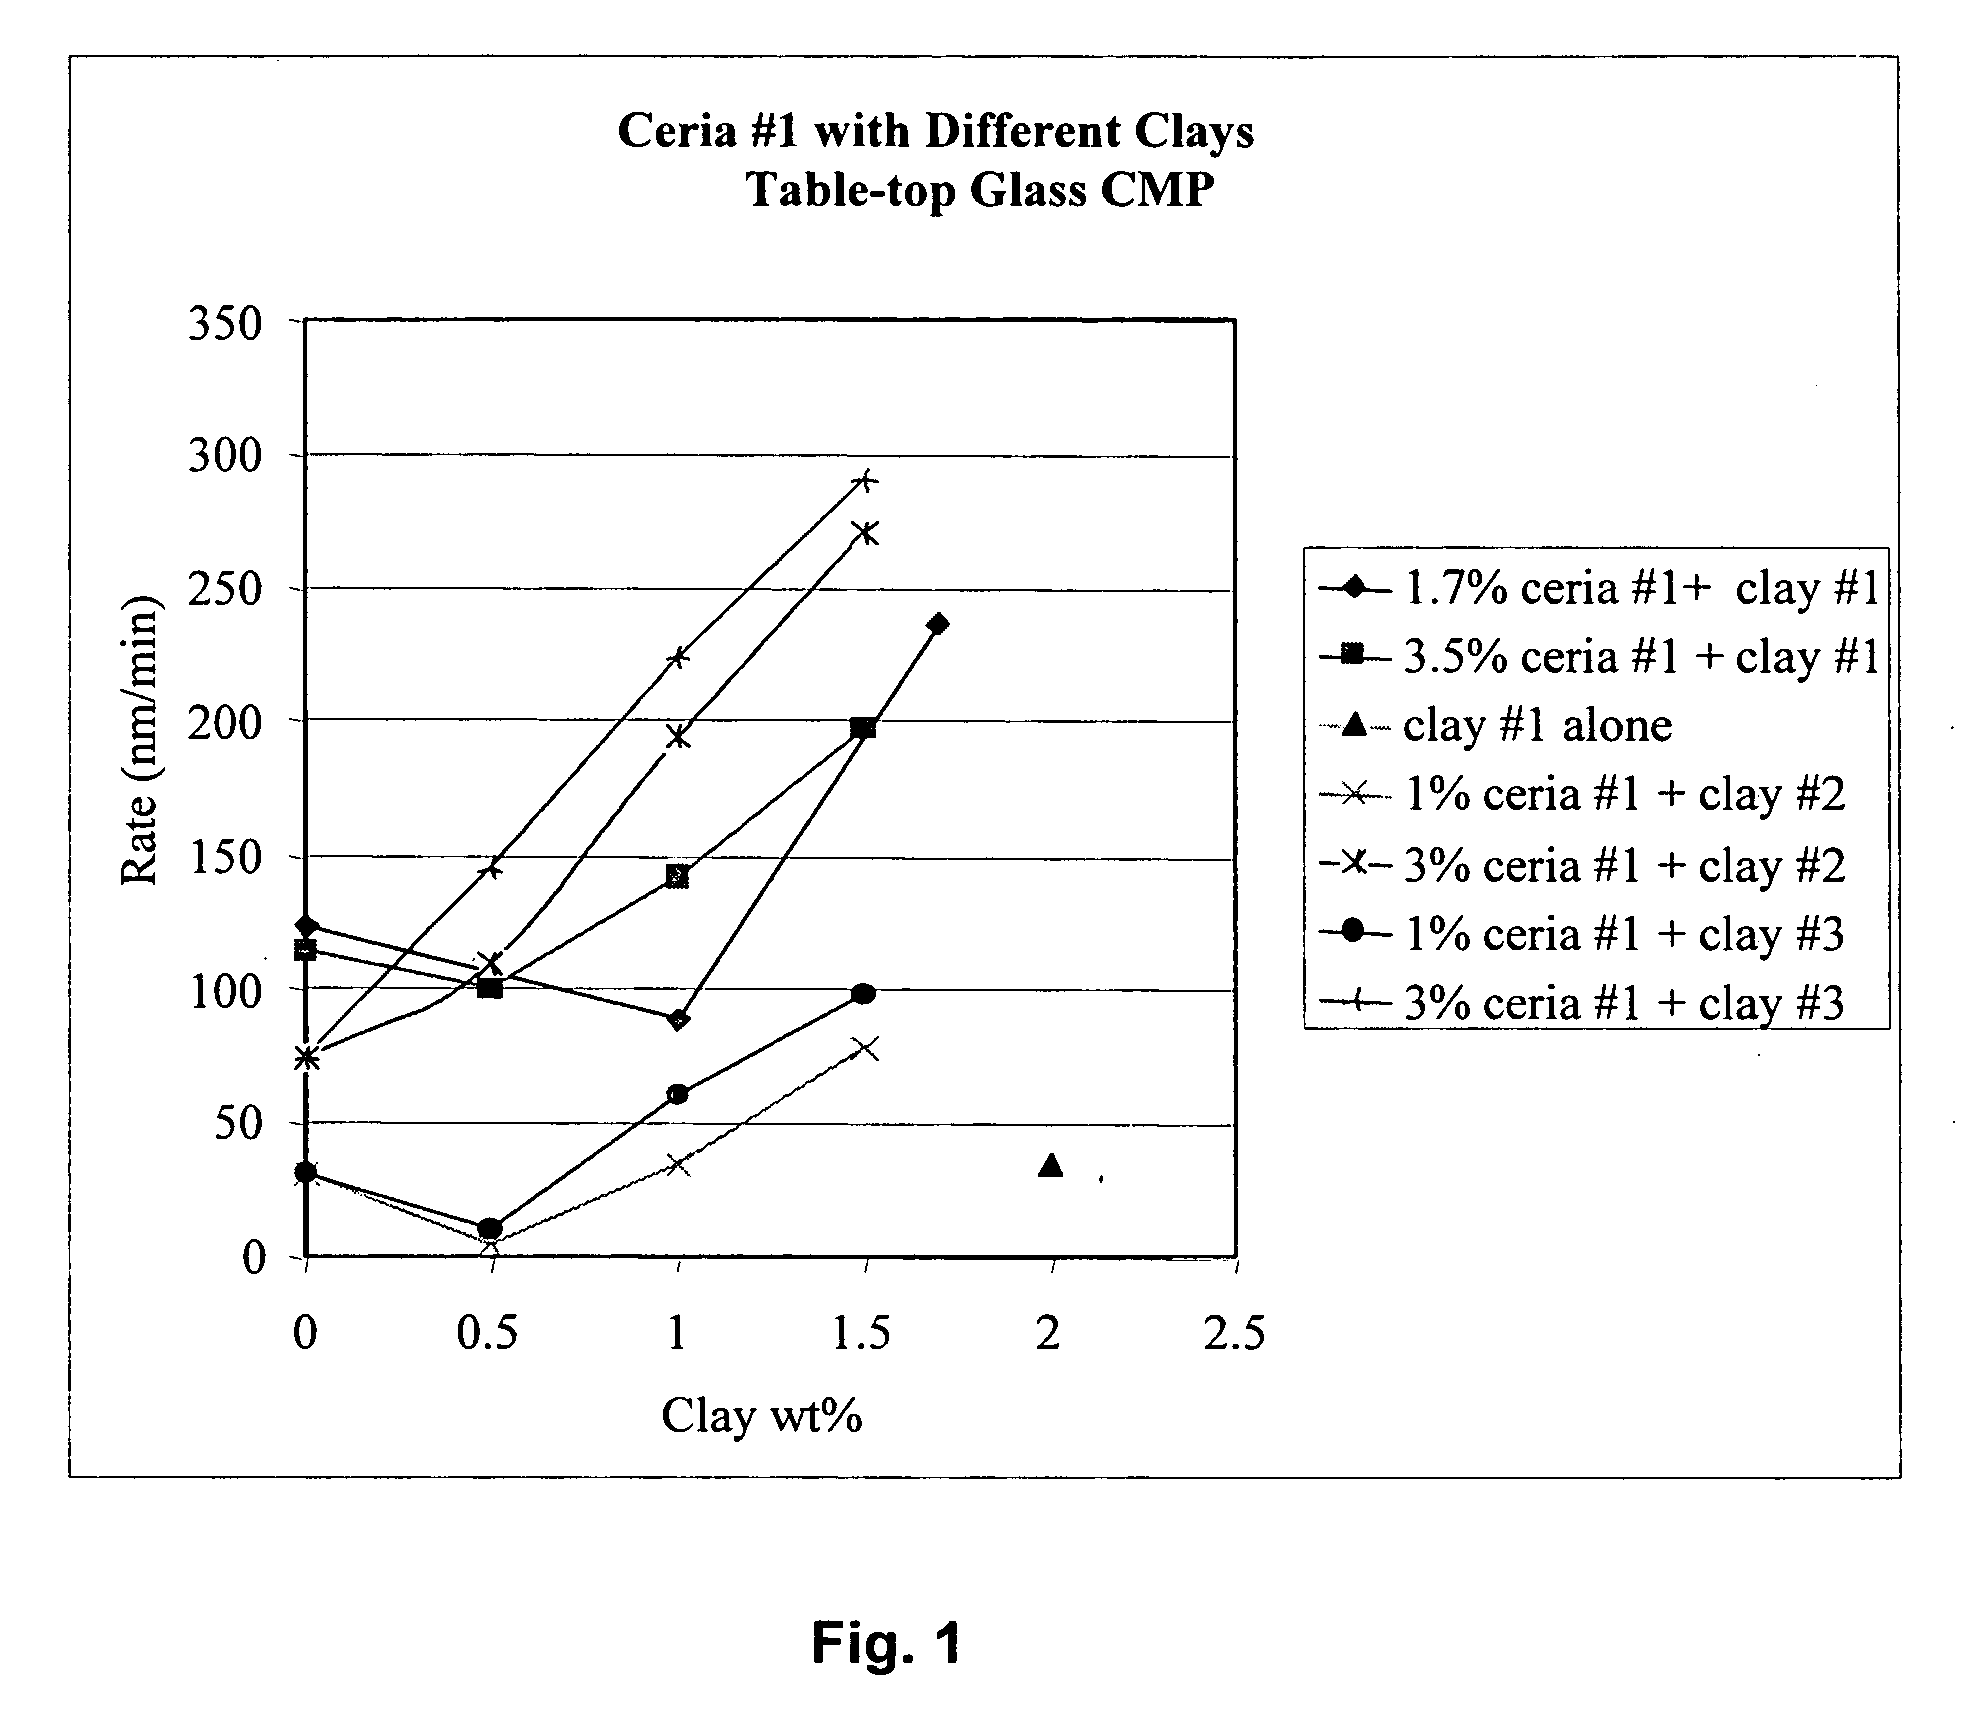 Chemical-mechanical polishing (CMP) slurry containing clay and CeO2 abrasive particles and method of planarizing surfaces